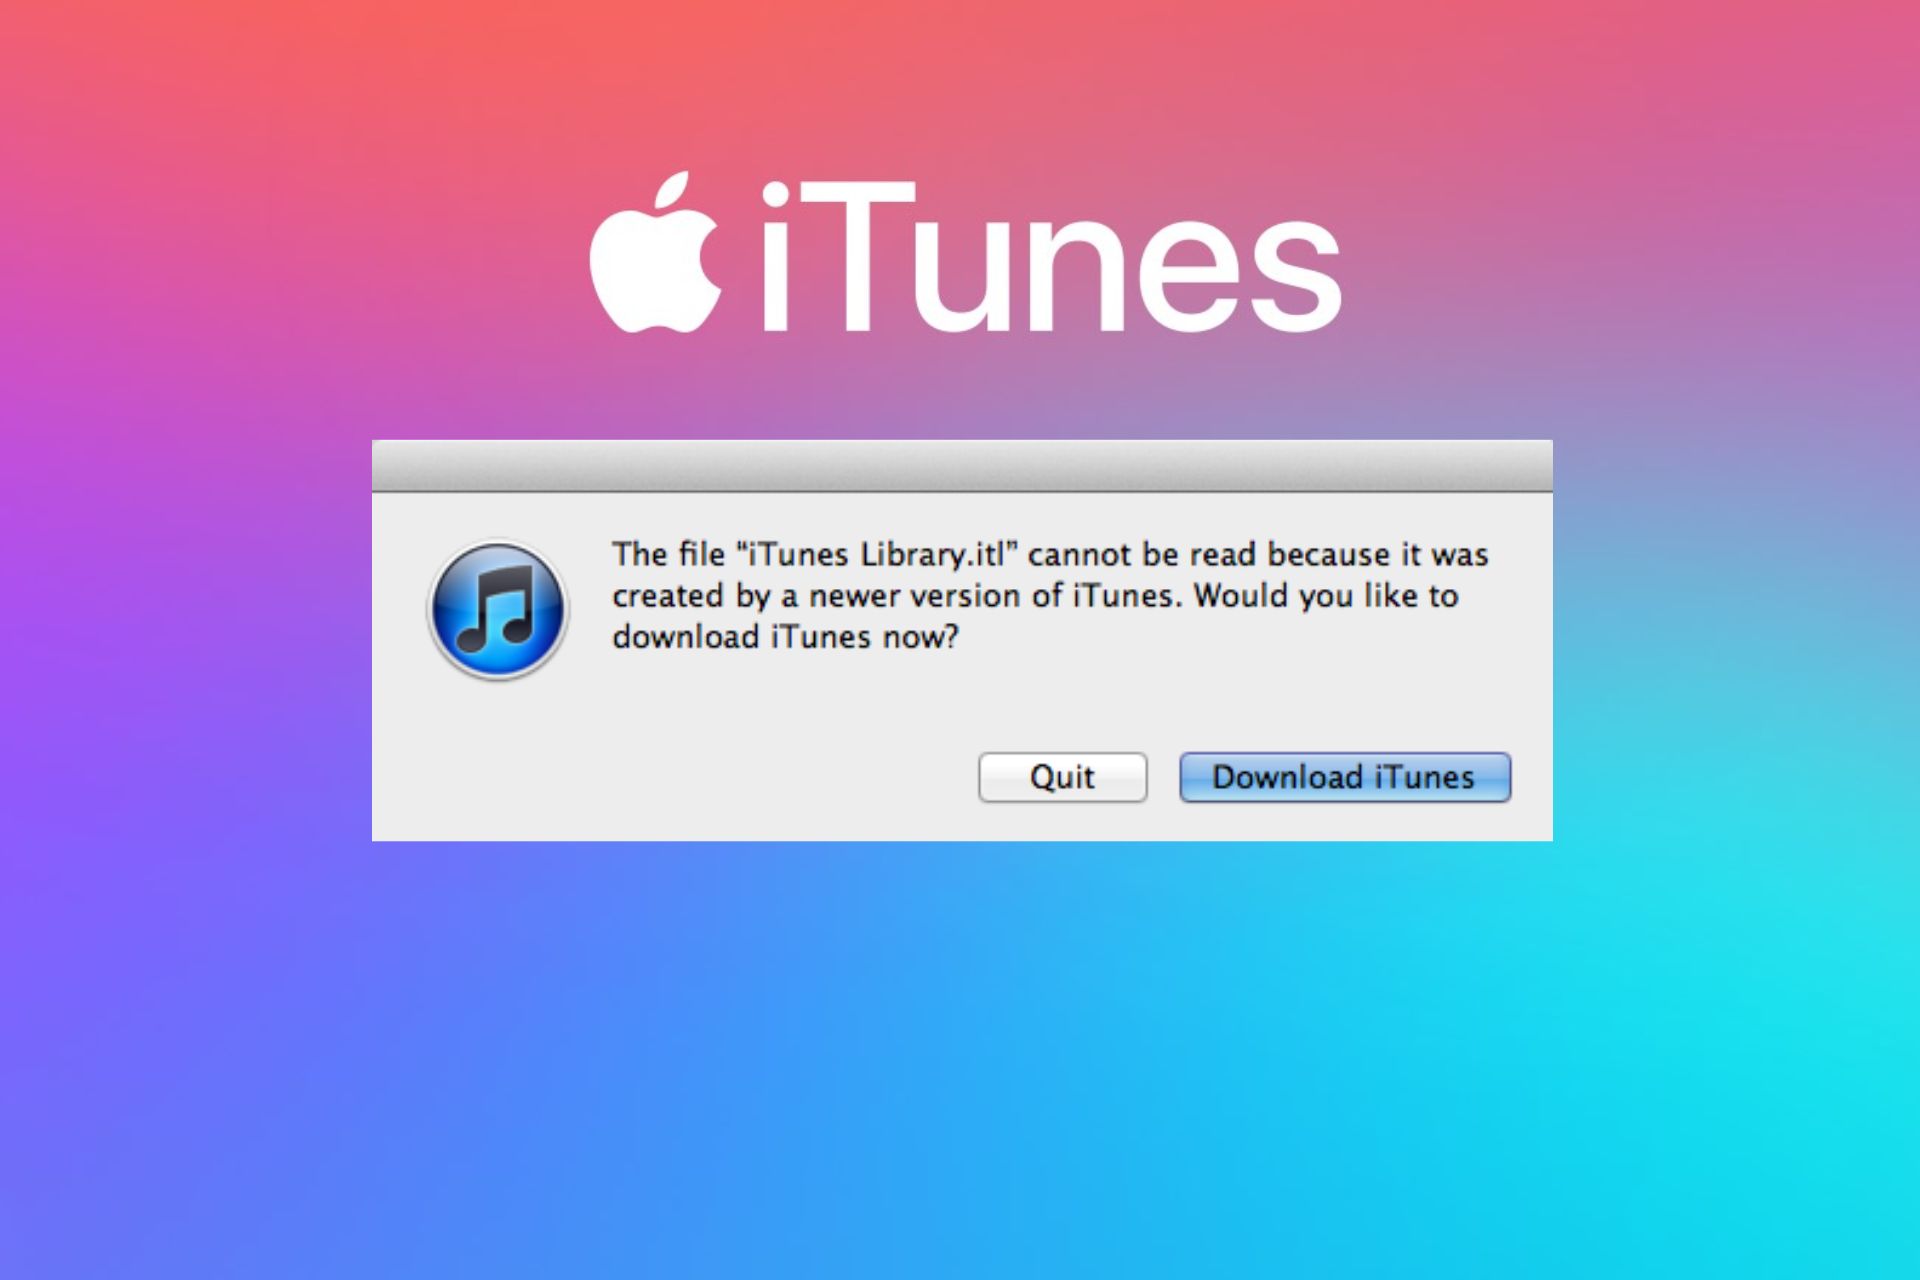 the file itunes library.itl cannot be read because it was created by a newer version of itunes